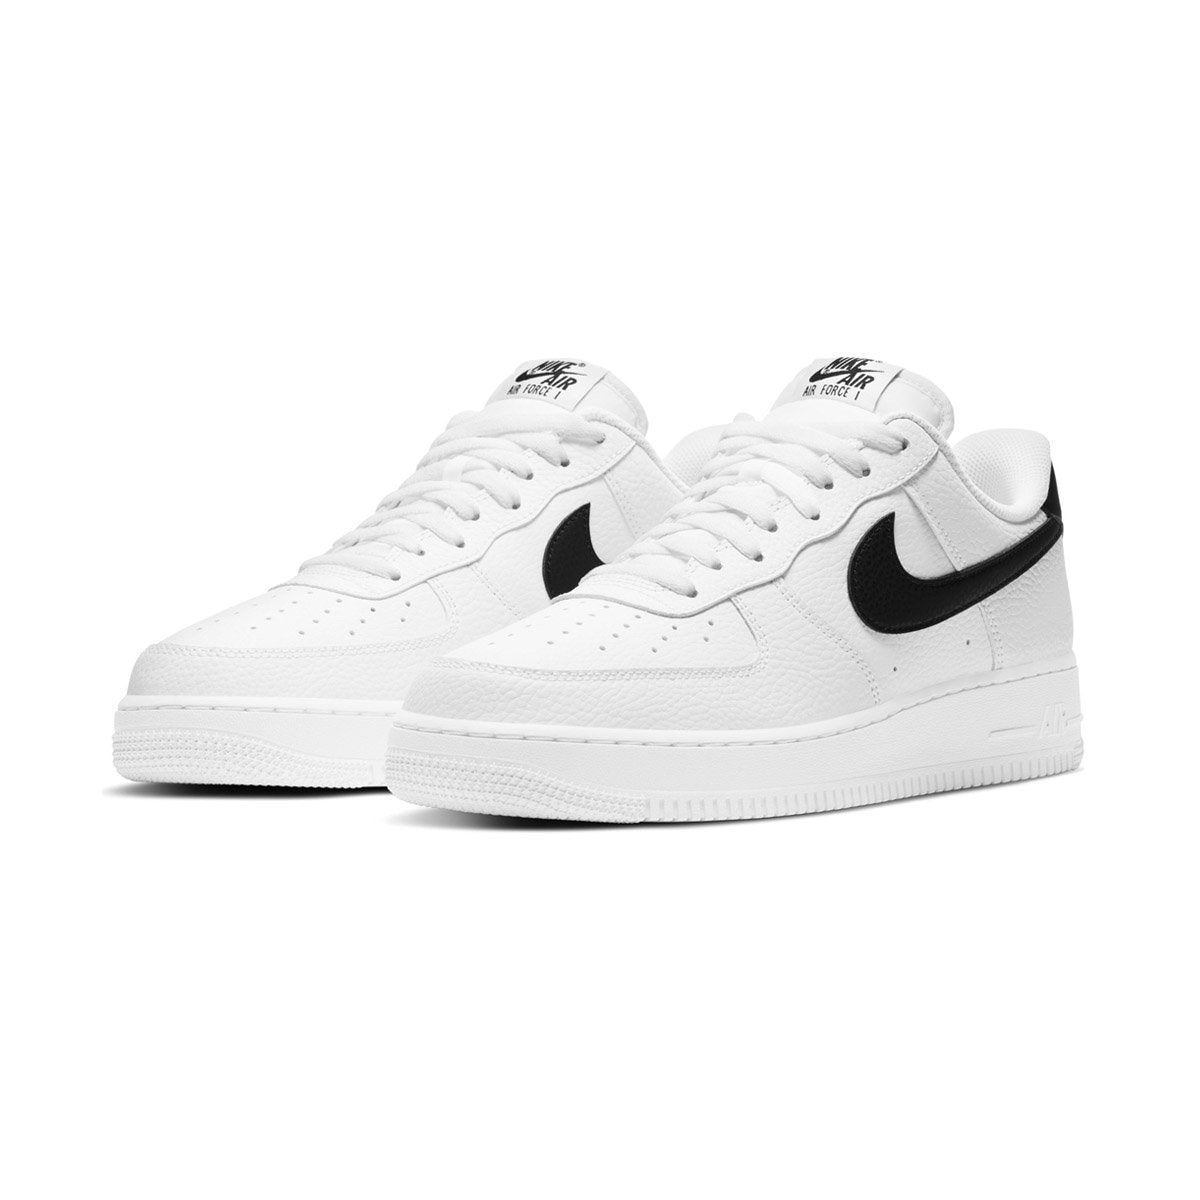 Nike Air Force 1 '07 Men's Shoes - White